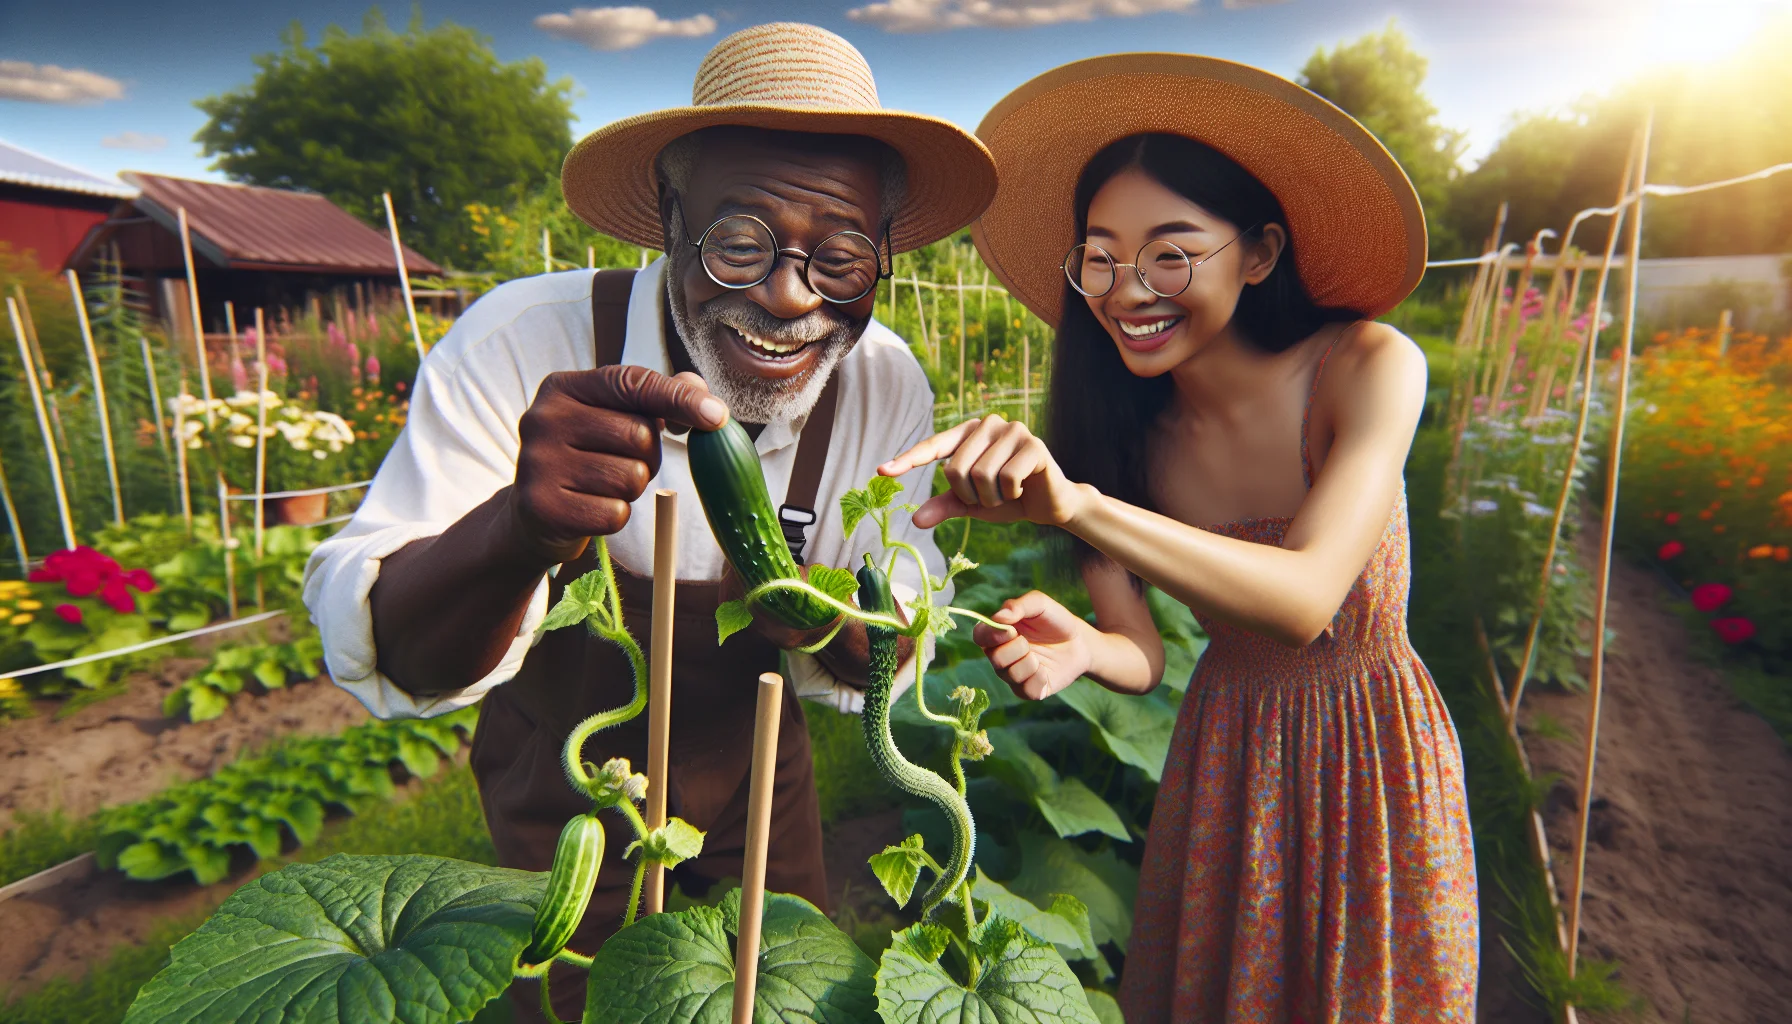 Create an amusingly engaging garden scene where two individuals are staking a cucumber plant. One person, an elderly Black man with a sun hat and glasses, is instructing a young Asian woman, wearing a straw hat and a vibrant sundress, on how to stake the cucumber vine properly. They are surrounded by a vibrant garden with various other vegetables and flowers, with the sun shining overhead. Both are smiling, perhaps the vine somewhat resembles a green, curly snakes, adding to the humour. This jovial scenery will attract people towards the joy of gardening.